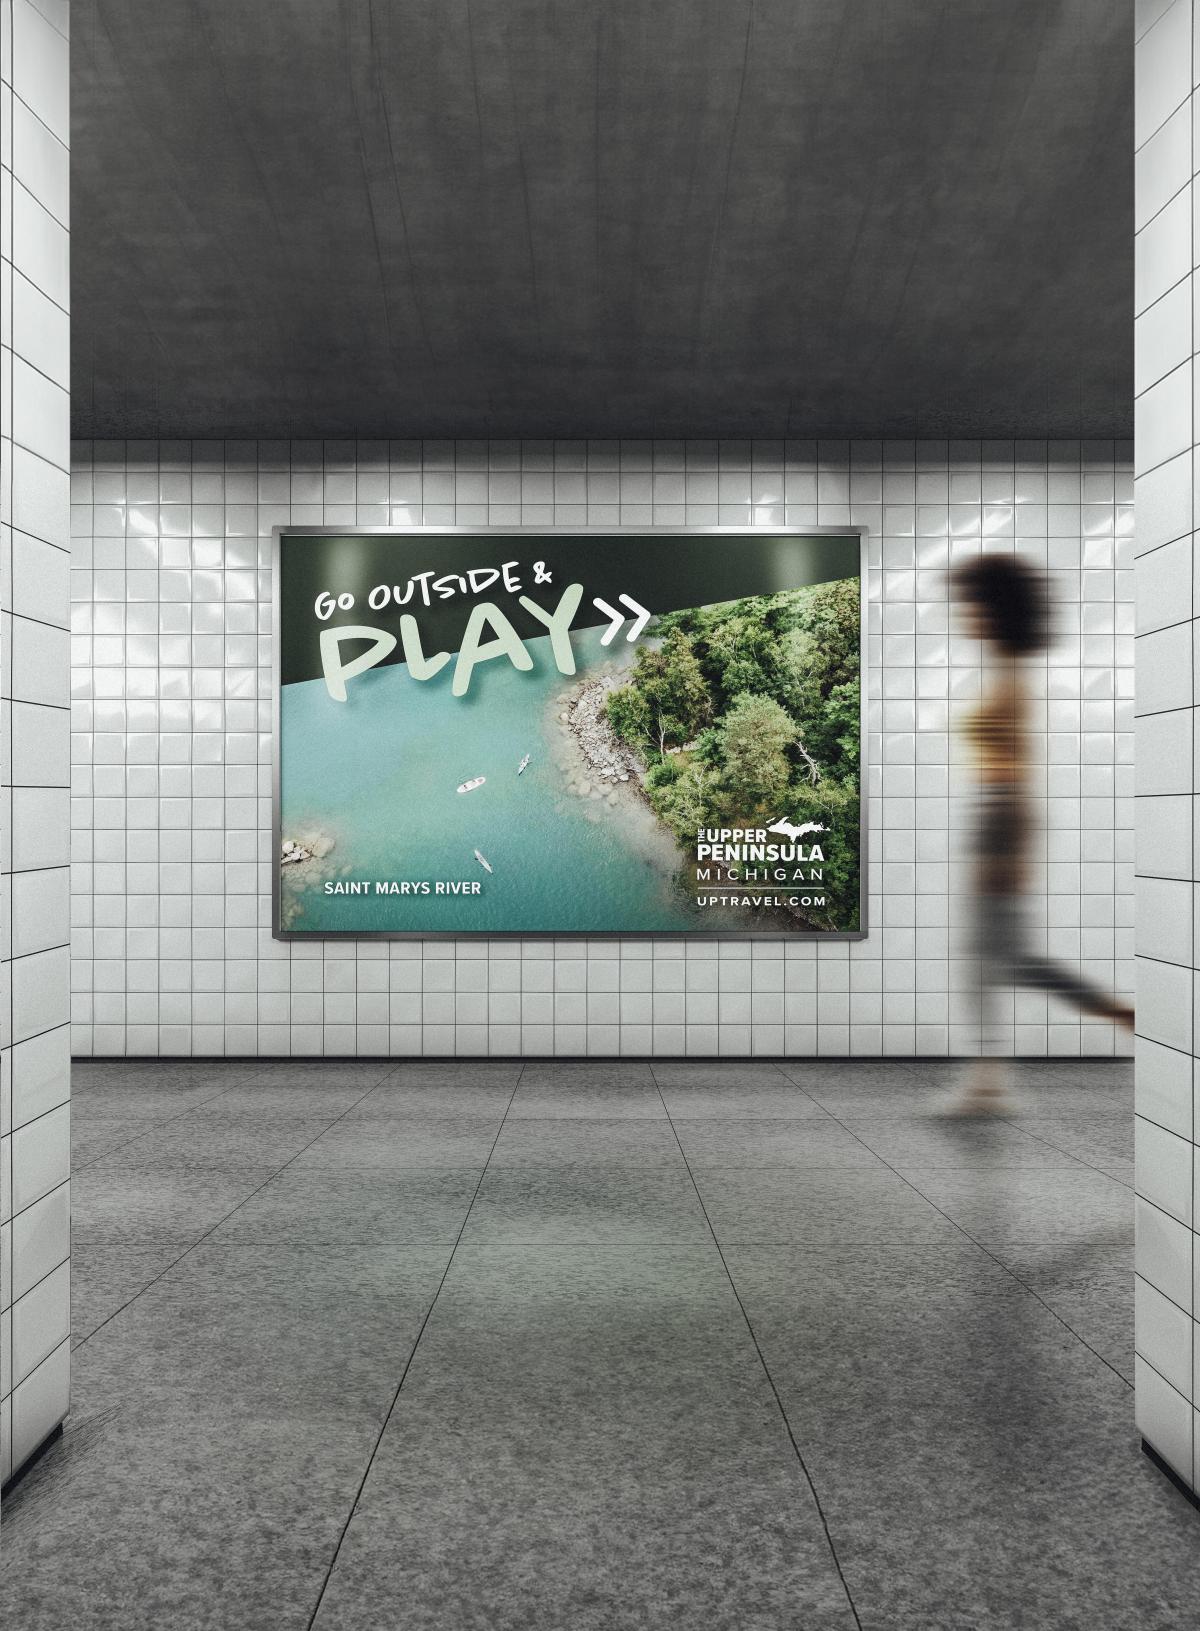 City billboard of St. Marys' River in a train station